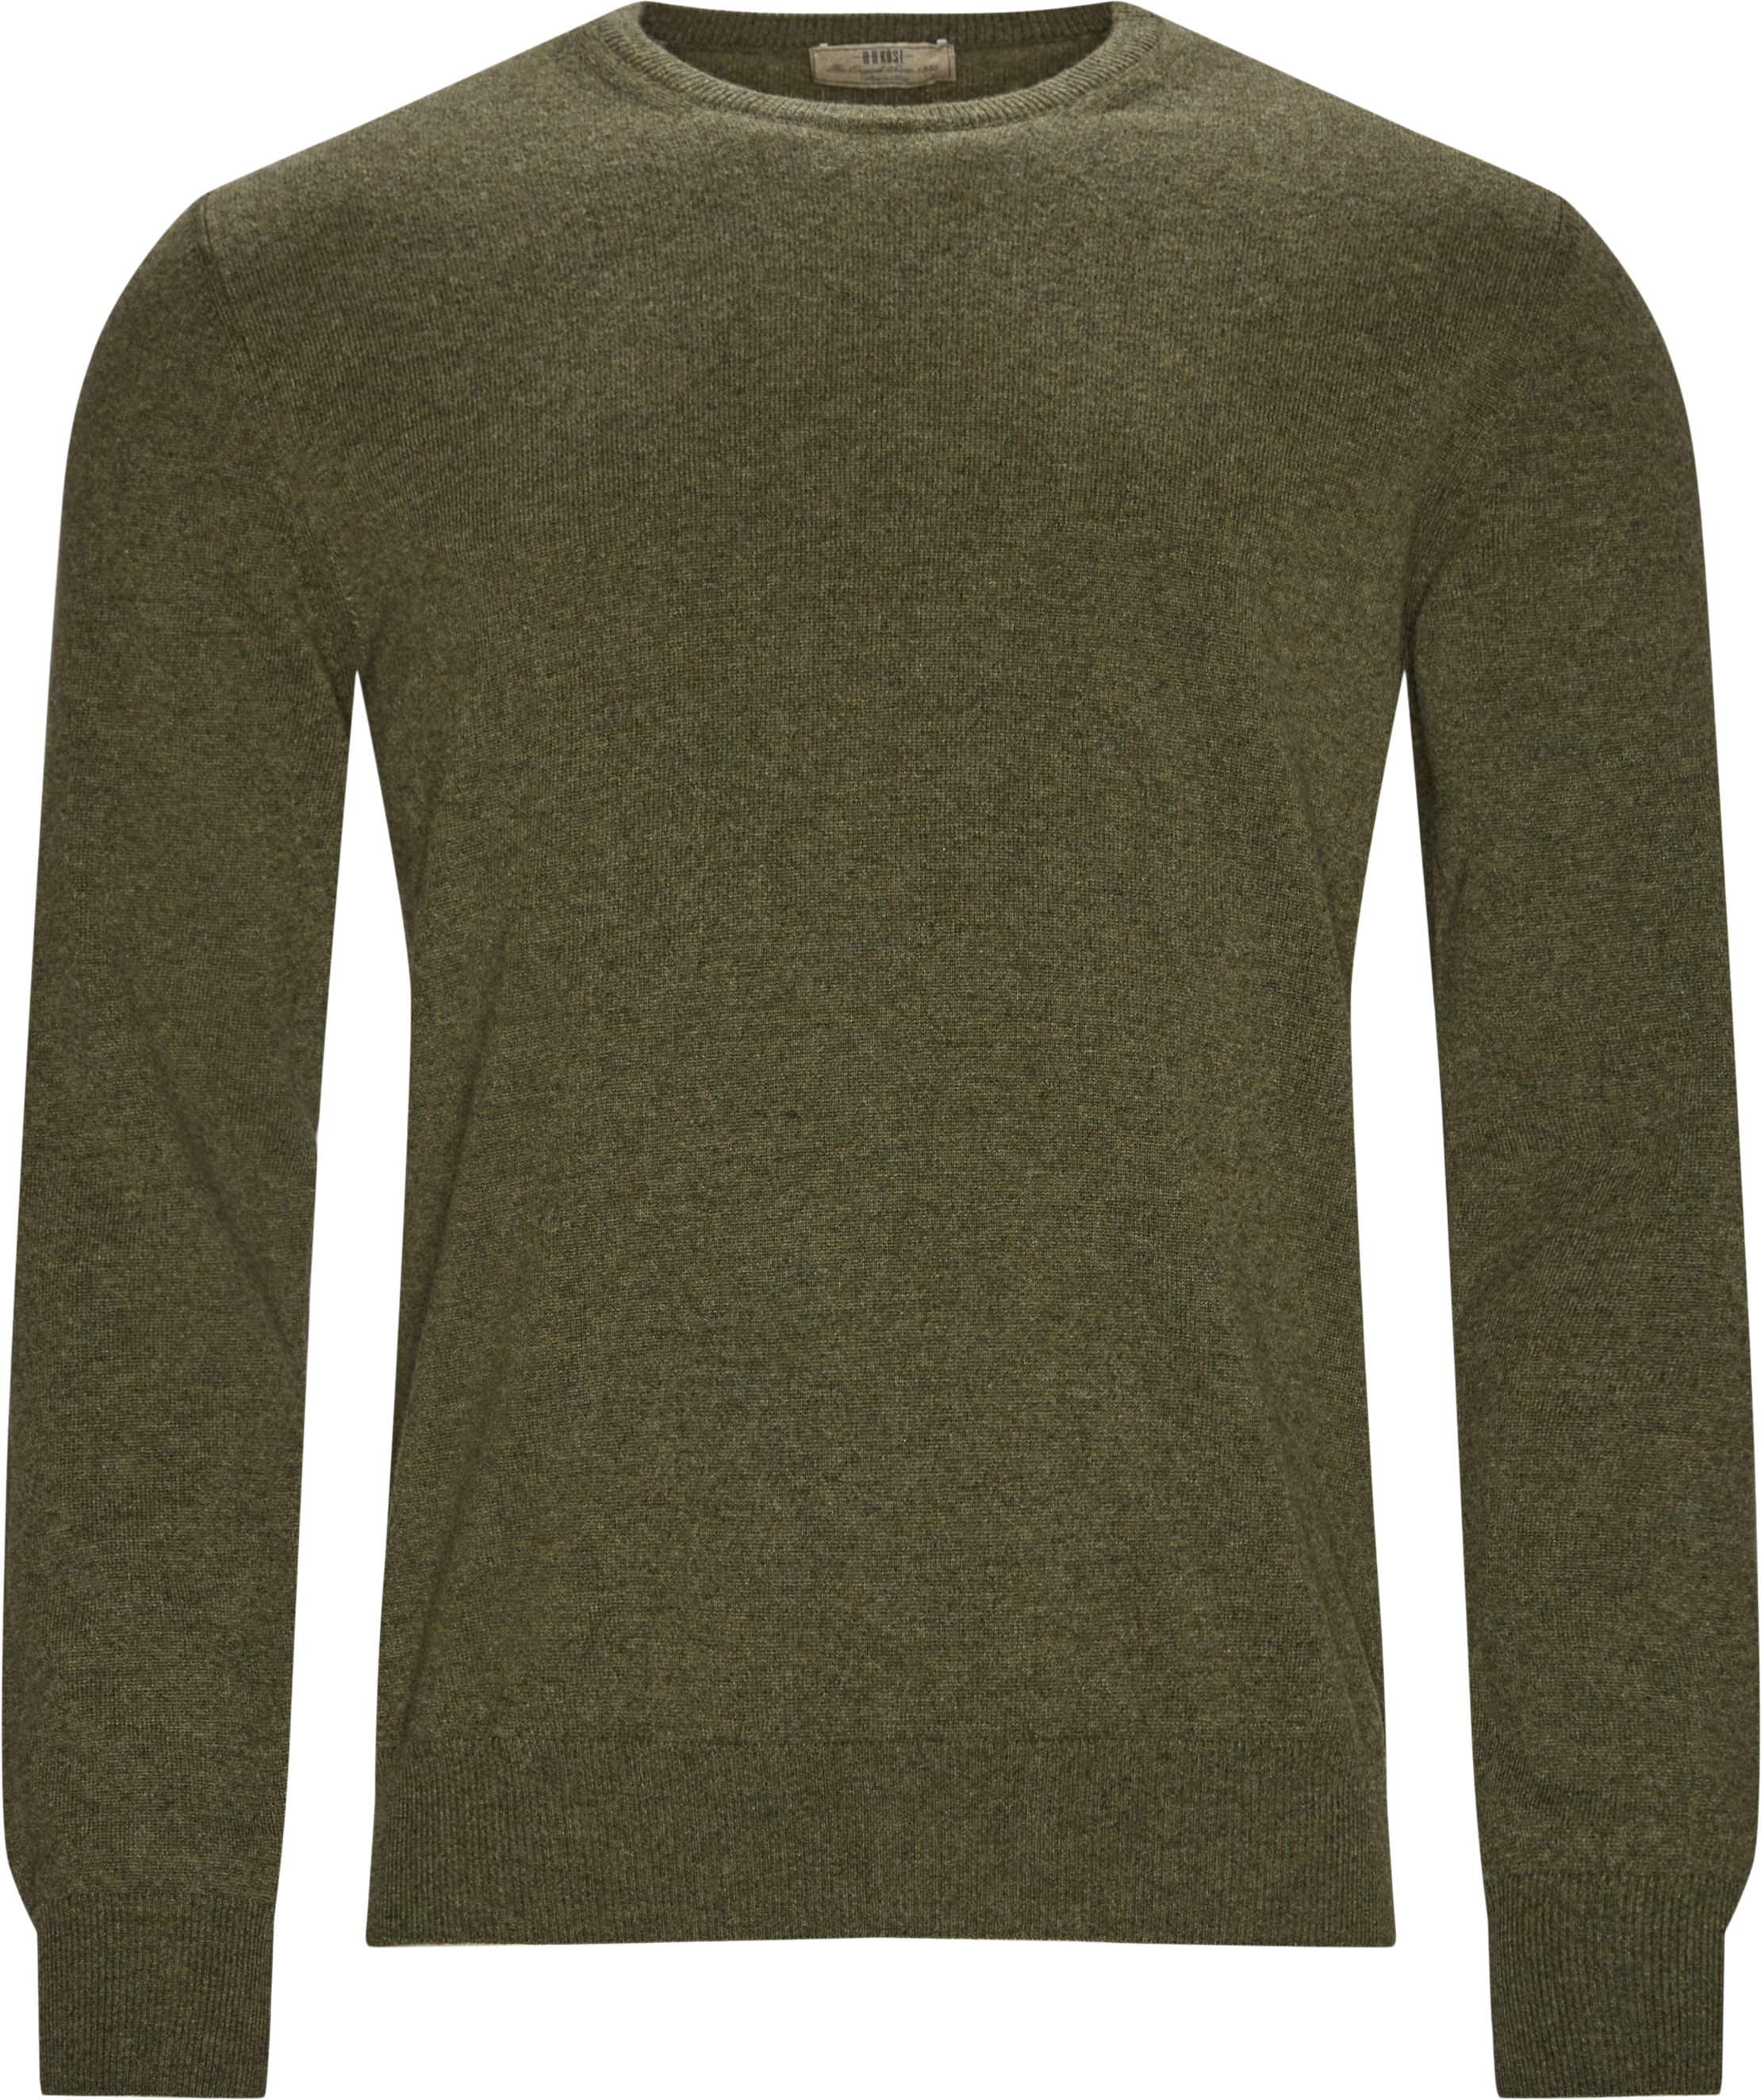 2040 Cashmere Knit - Knitwear - Regular fit - Army